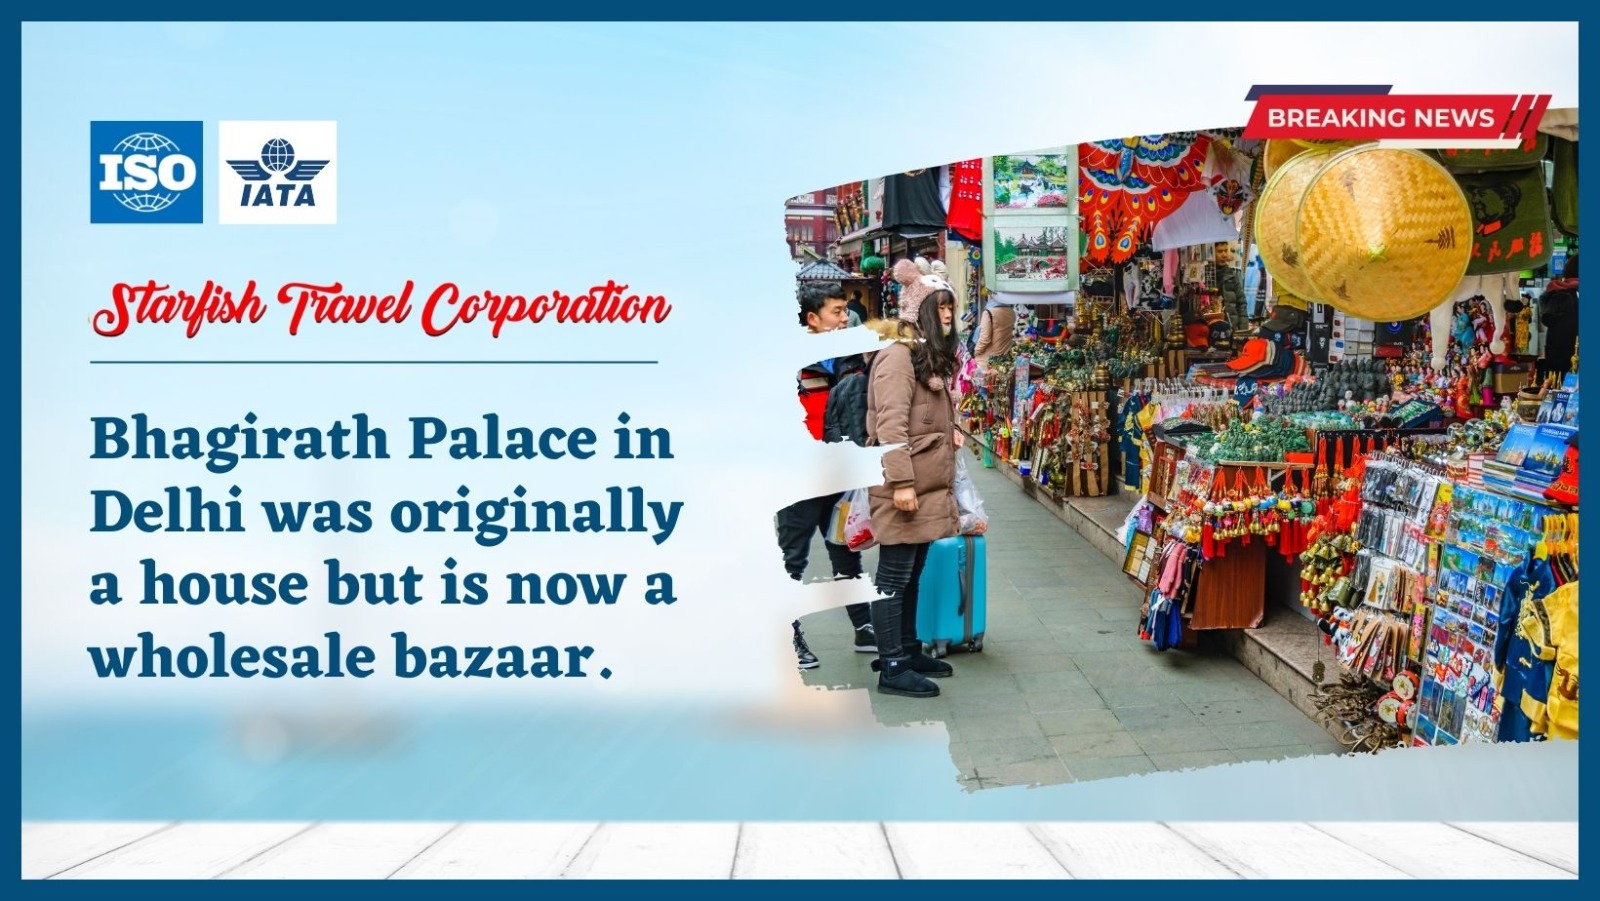 Bhagirath Palace in Delhi was originally a house but is now a wholesale bazaar.